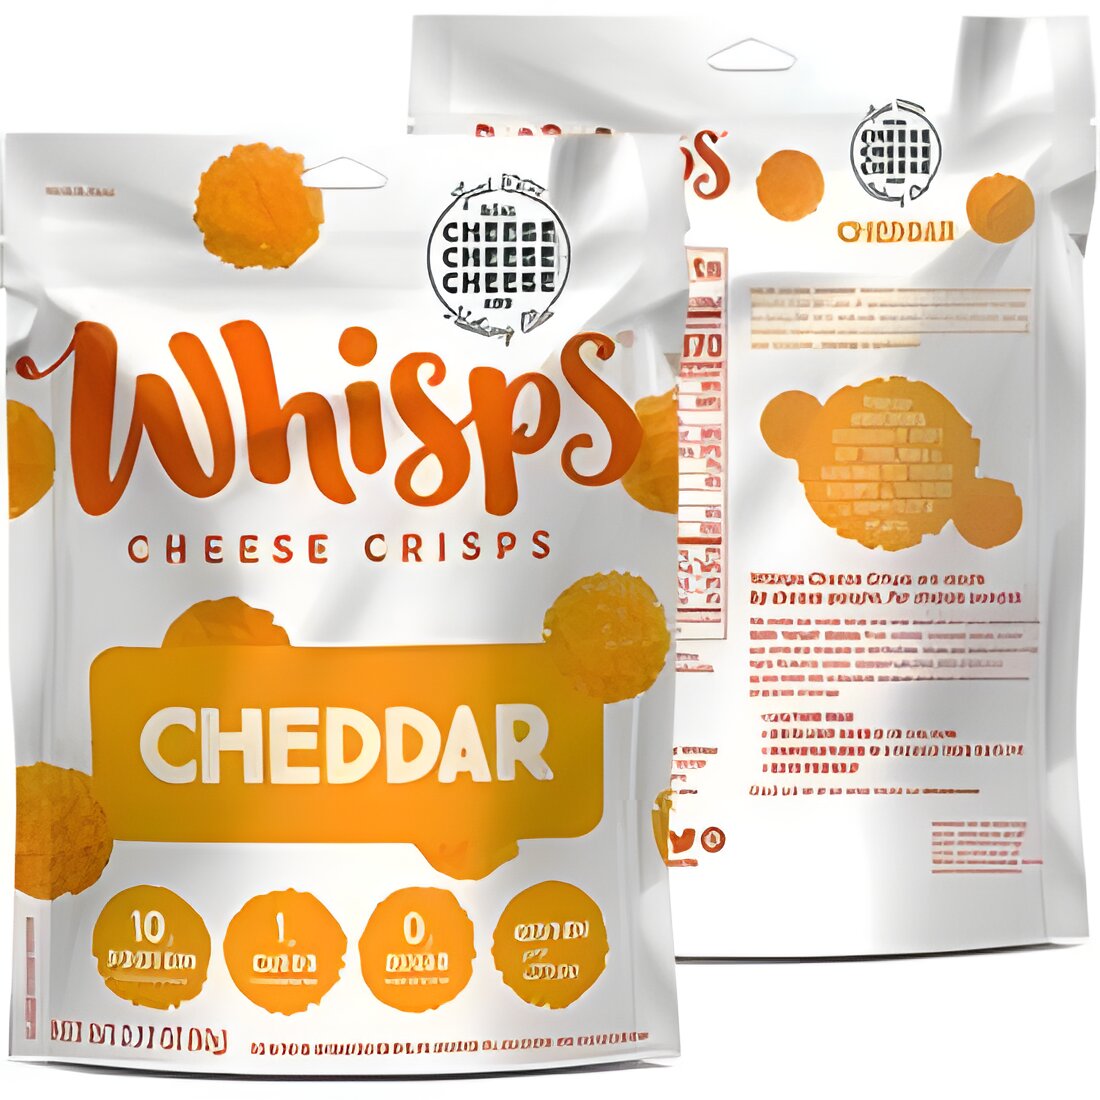 Free Whisps Cheddar Cheese Crisps